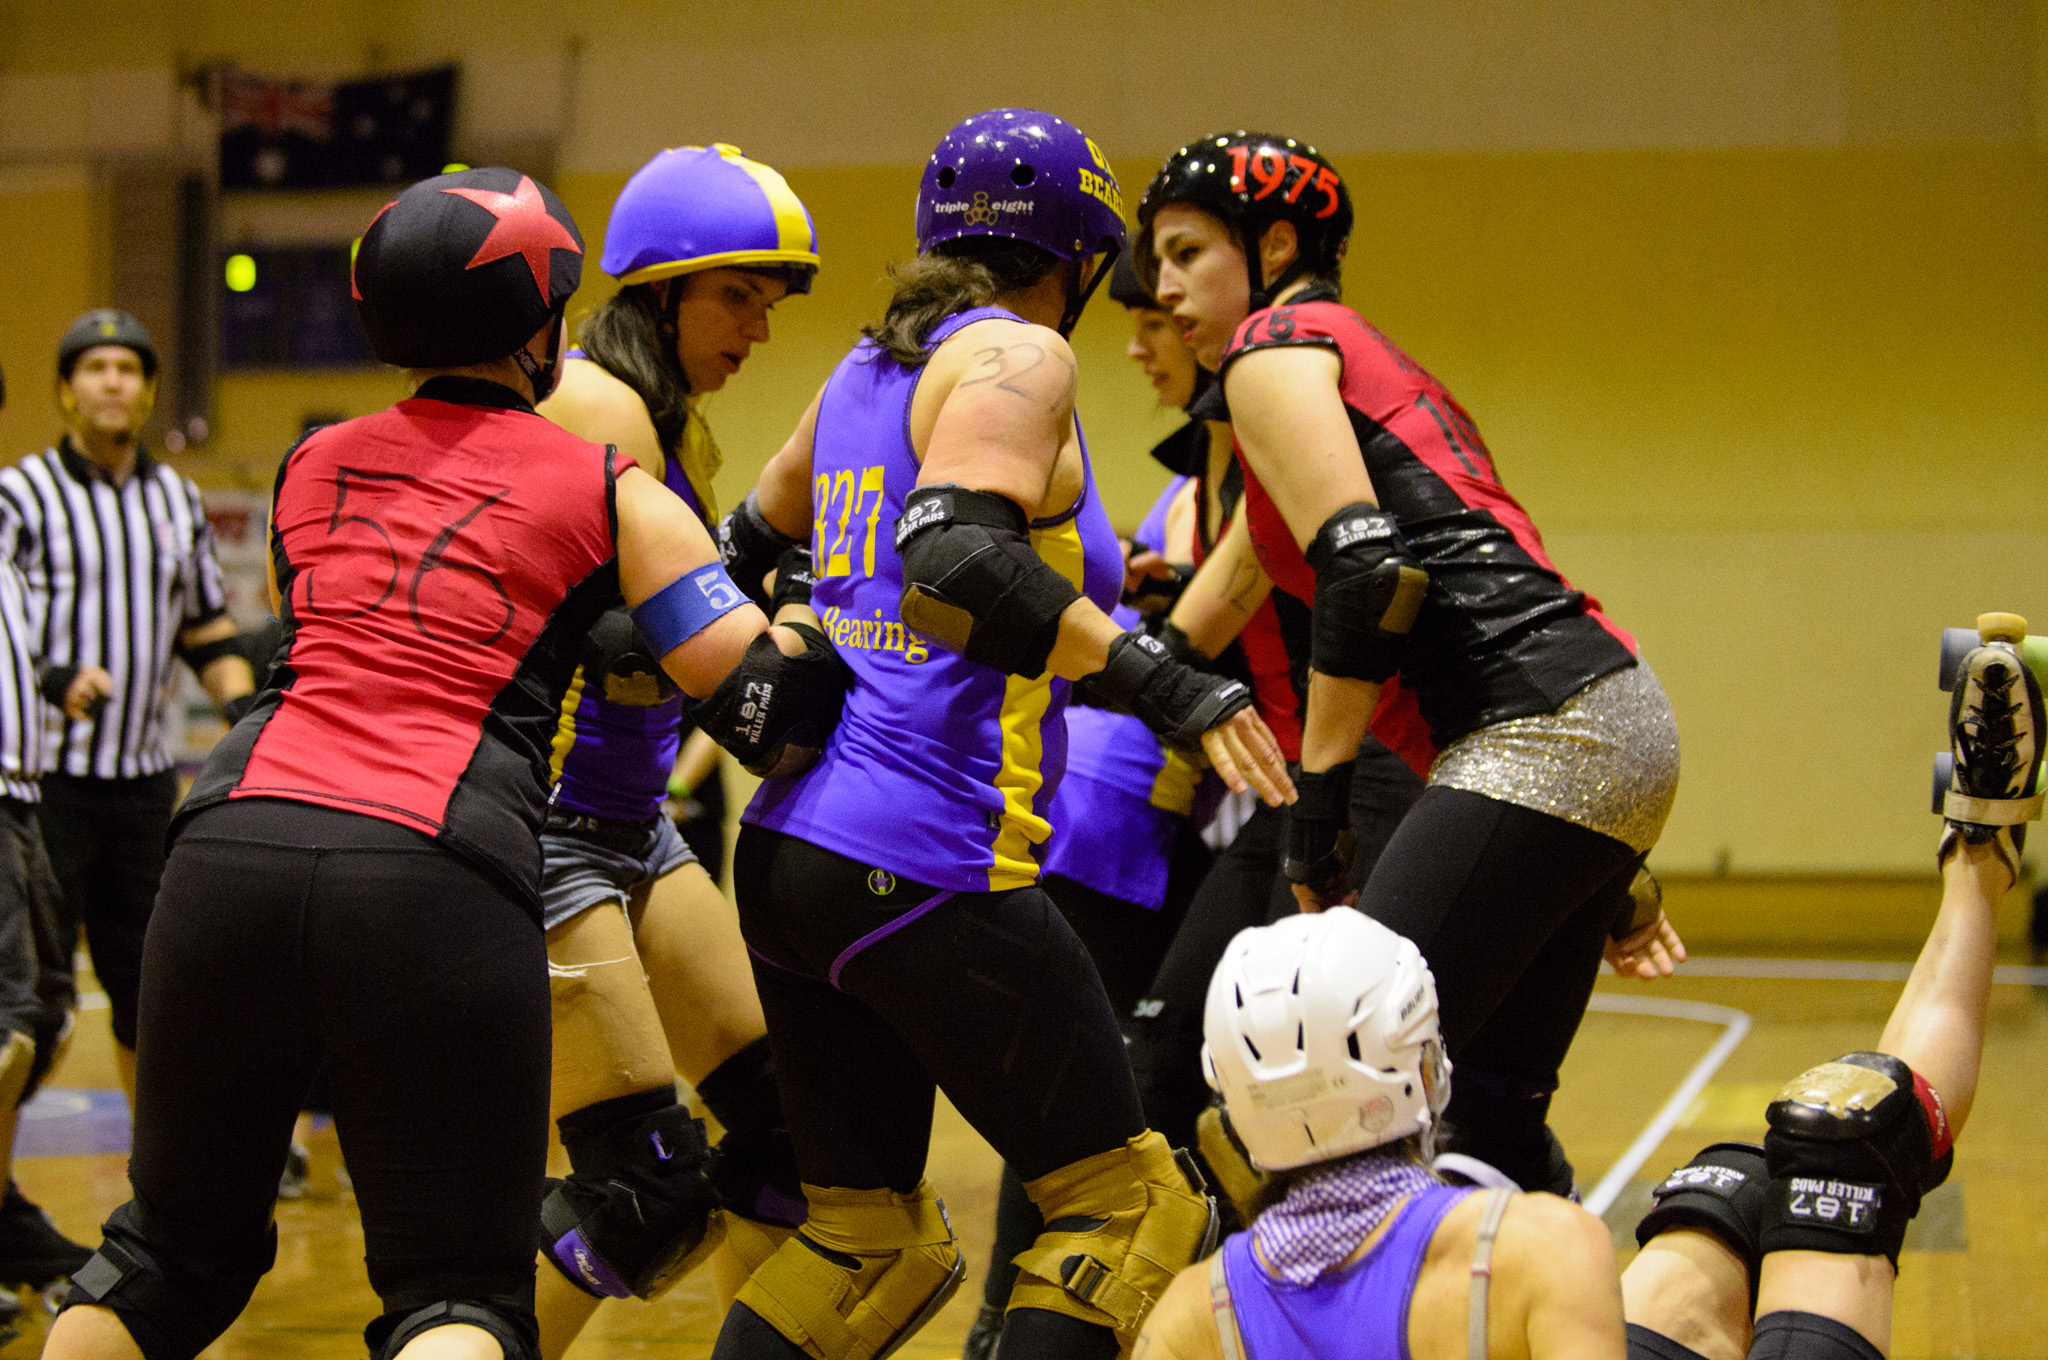 CRDL: Red Bellied Black Hearts v Brindabelters. Photographer: Brett Sargeant, D-eye Photography